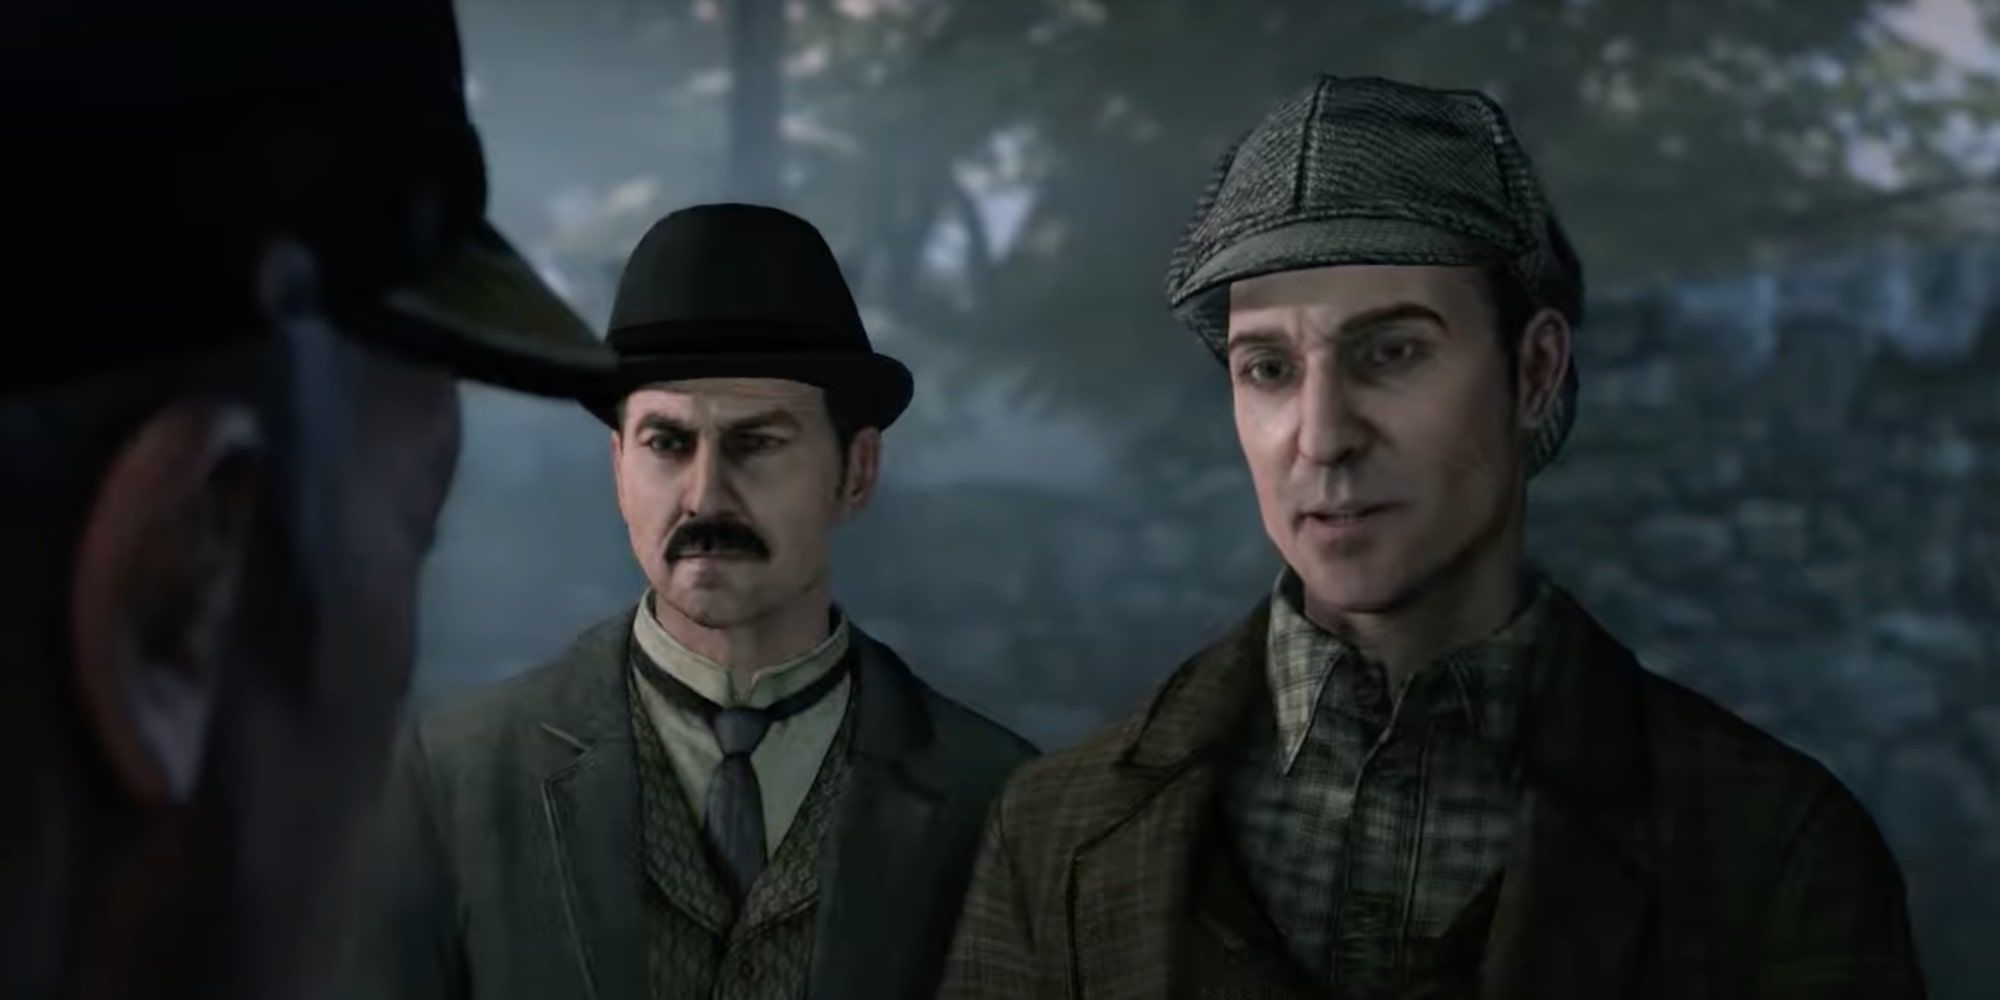 Sherlock Holmes and Dr Watson in Crimes & Punishments